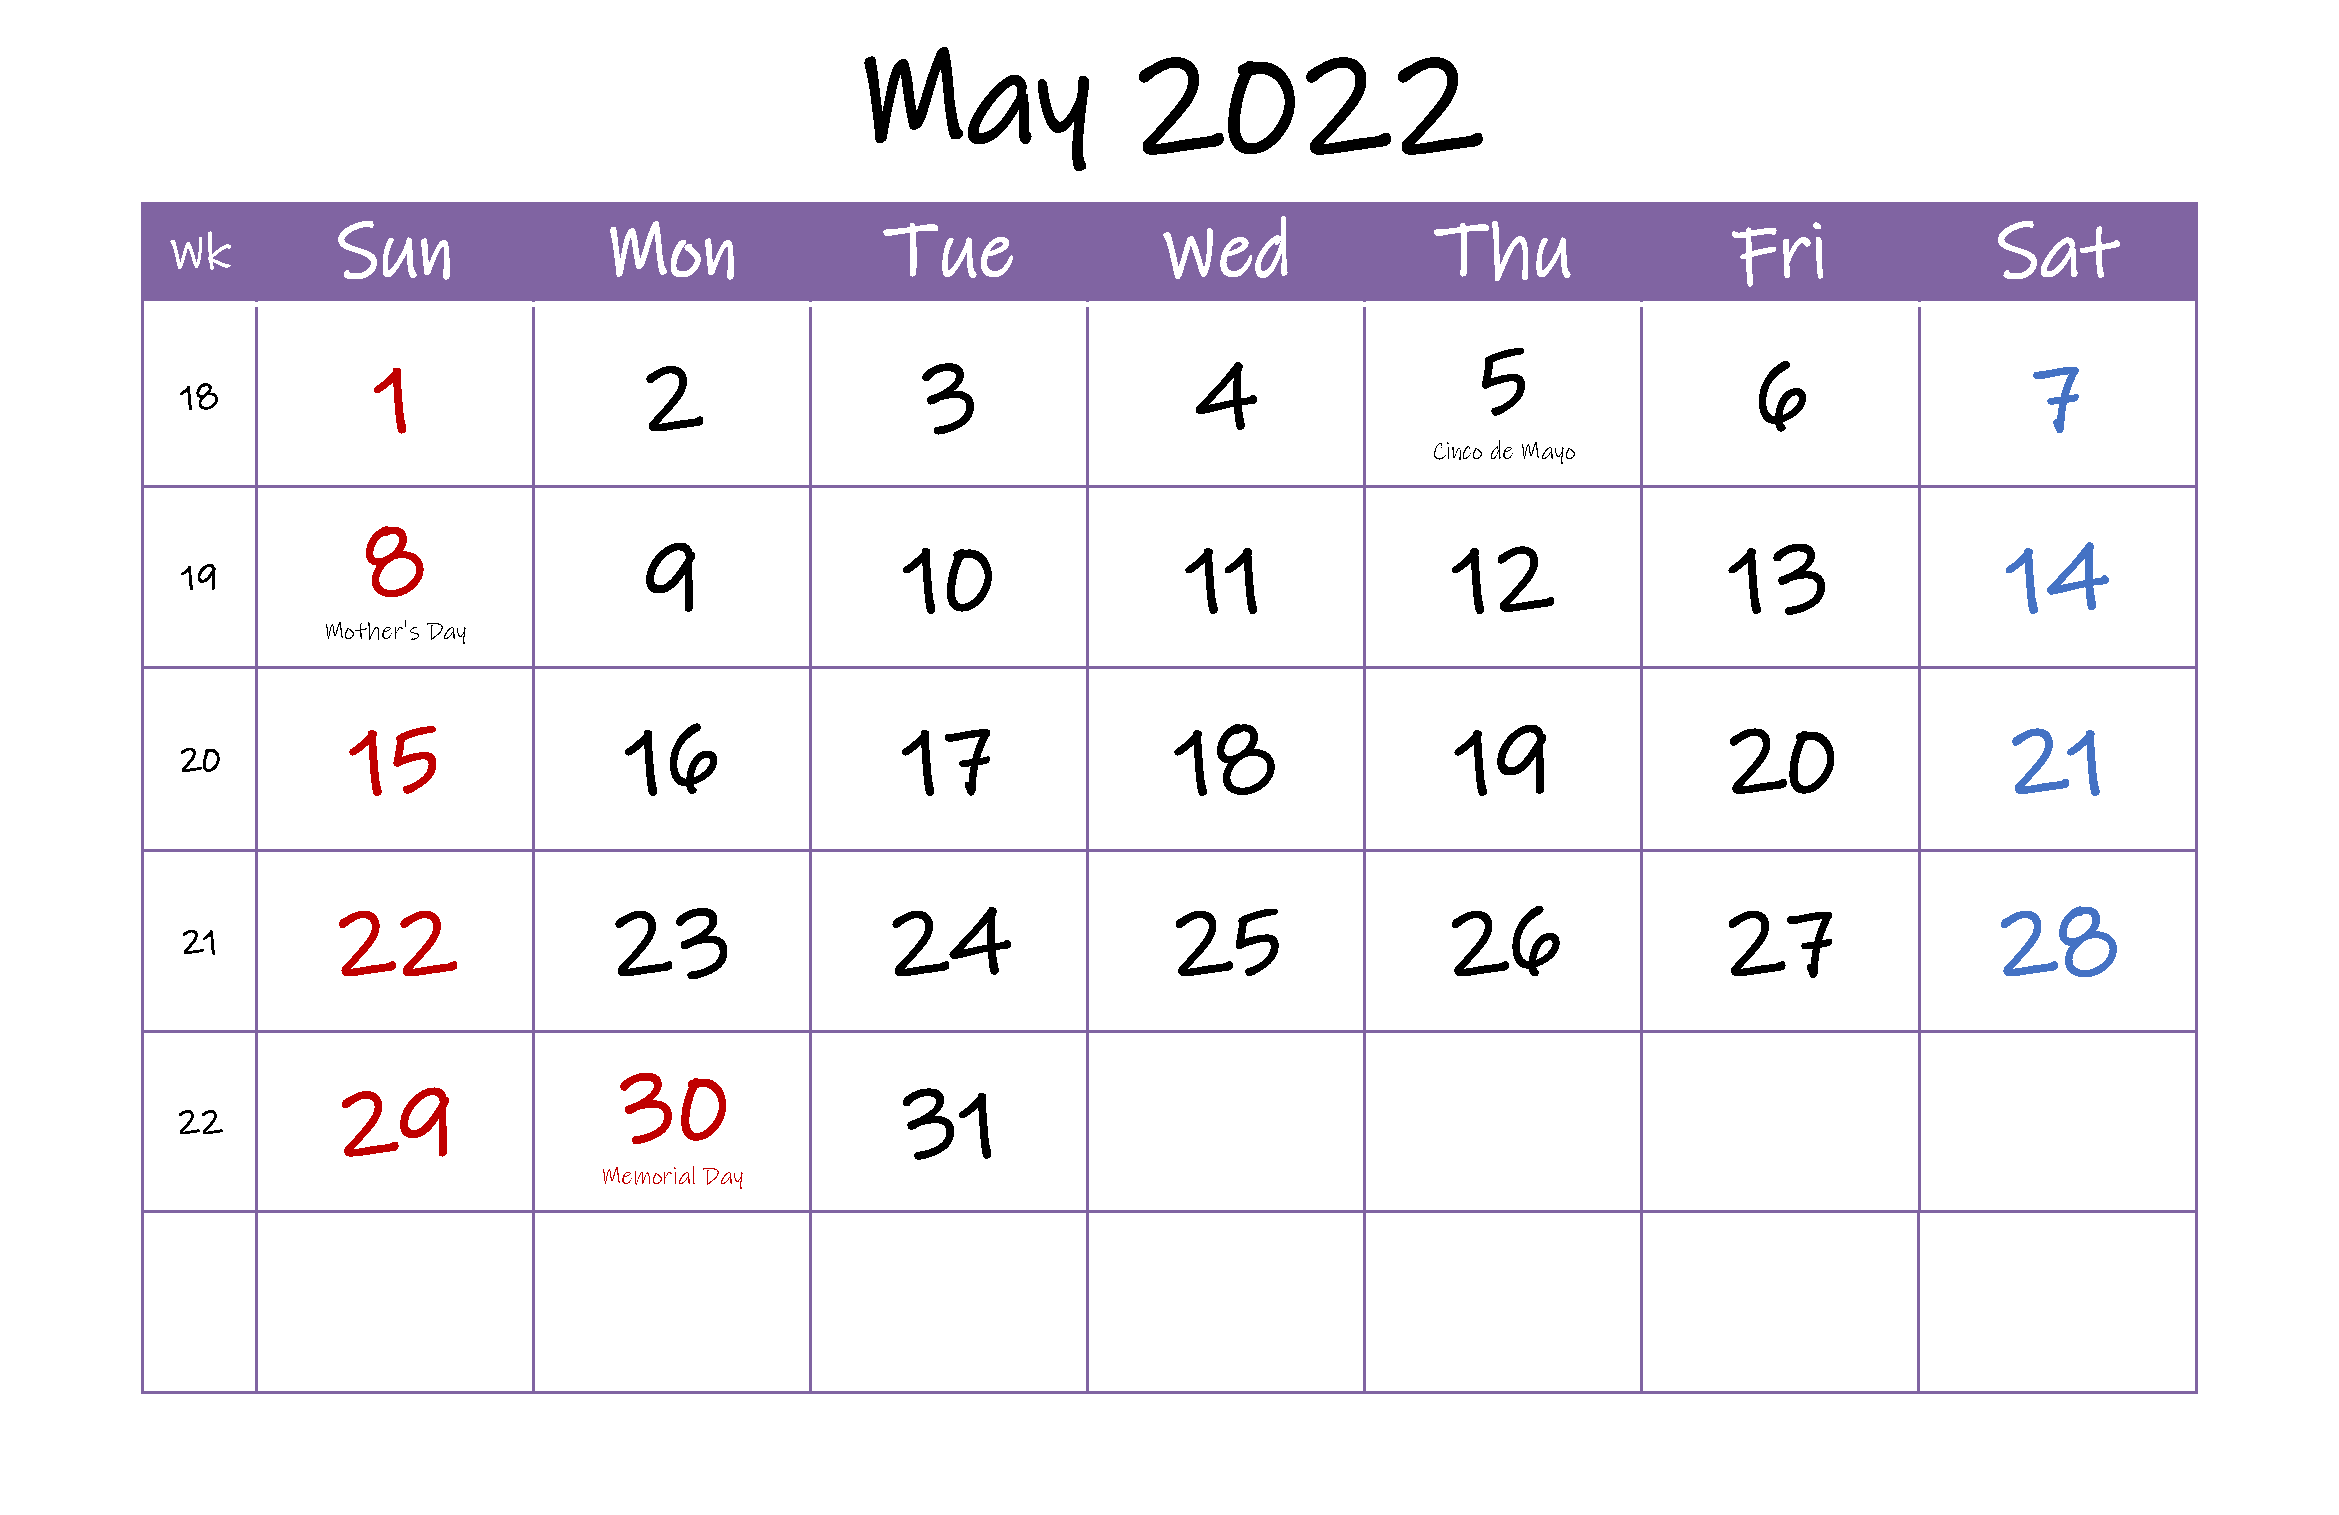 Schedule Your Time Table with May 2022 Calendar